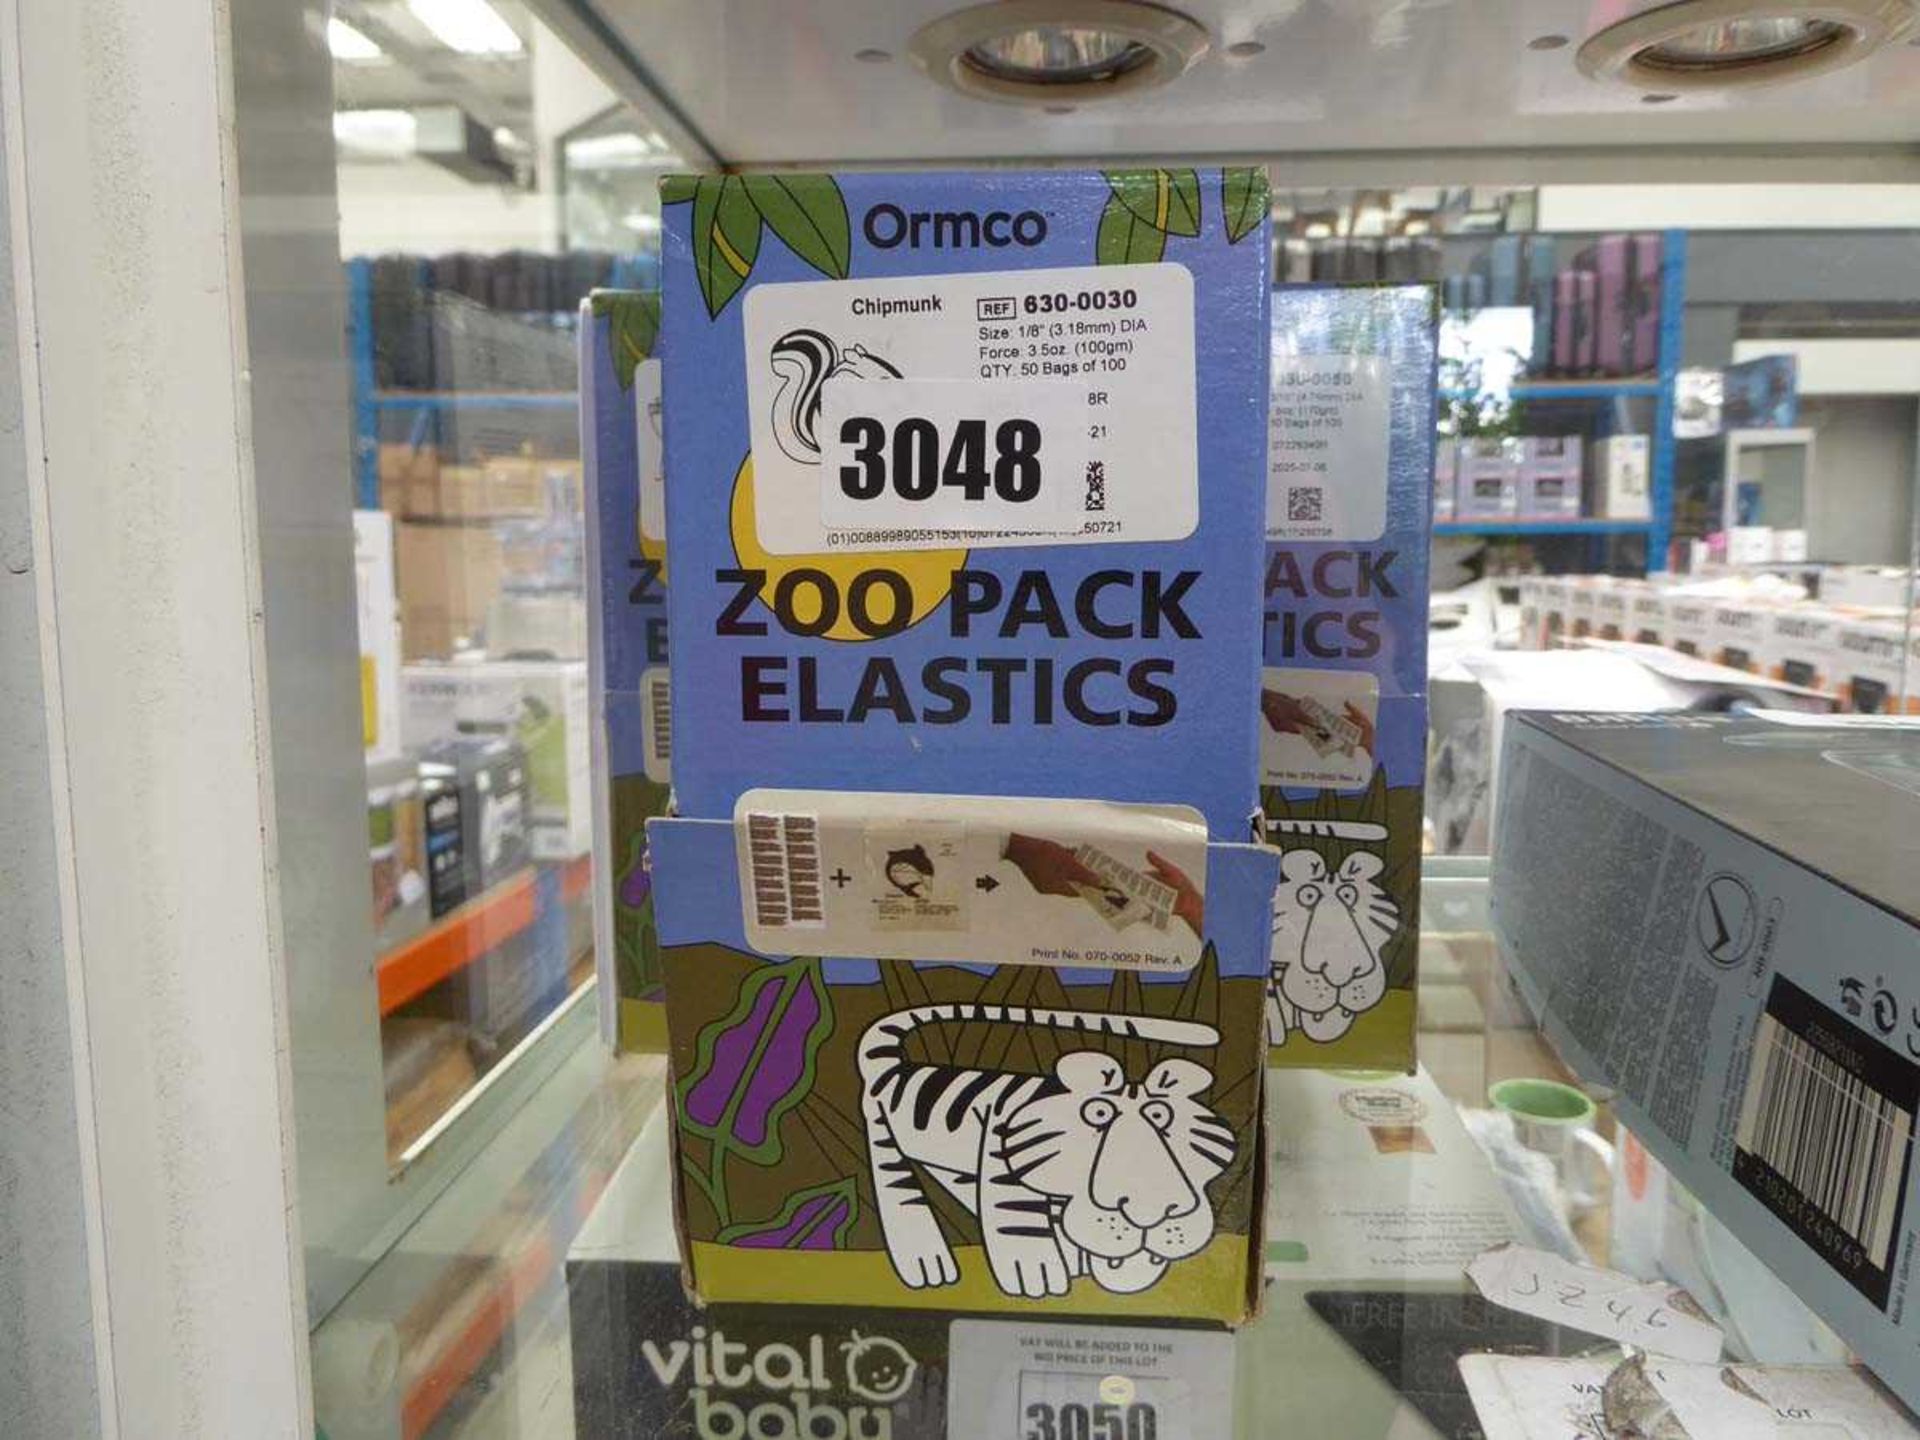 Five boxes of Zoo pack elastics for braces